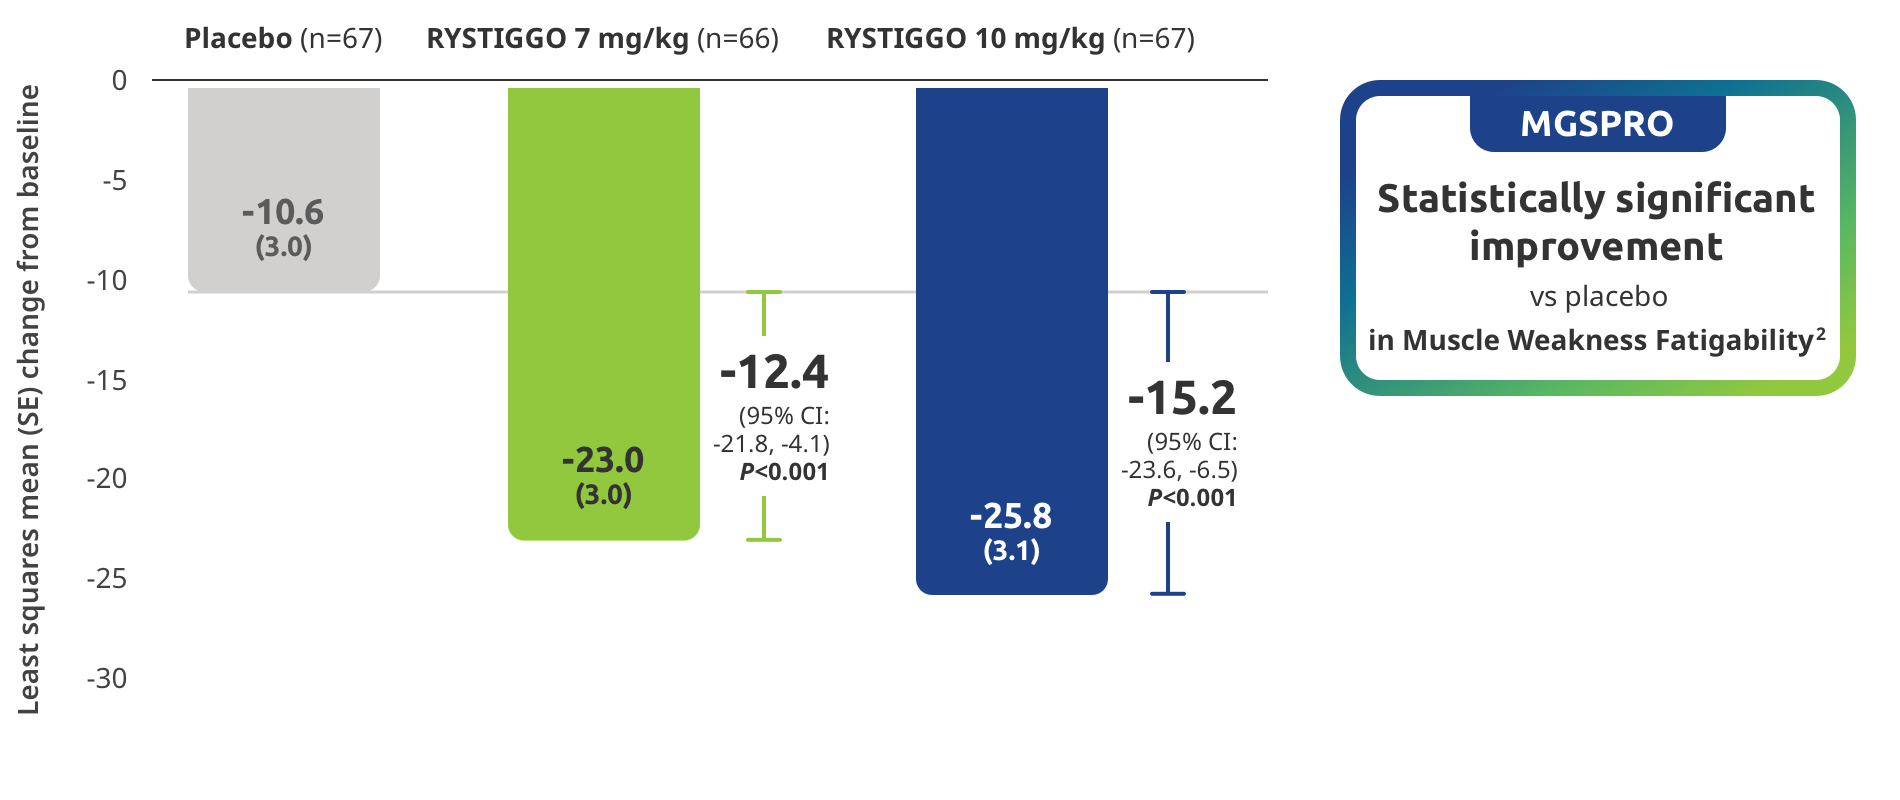 MGSPRO Statistically significant improvement vs placebo in Muscle Weakness Fatigability.